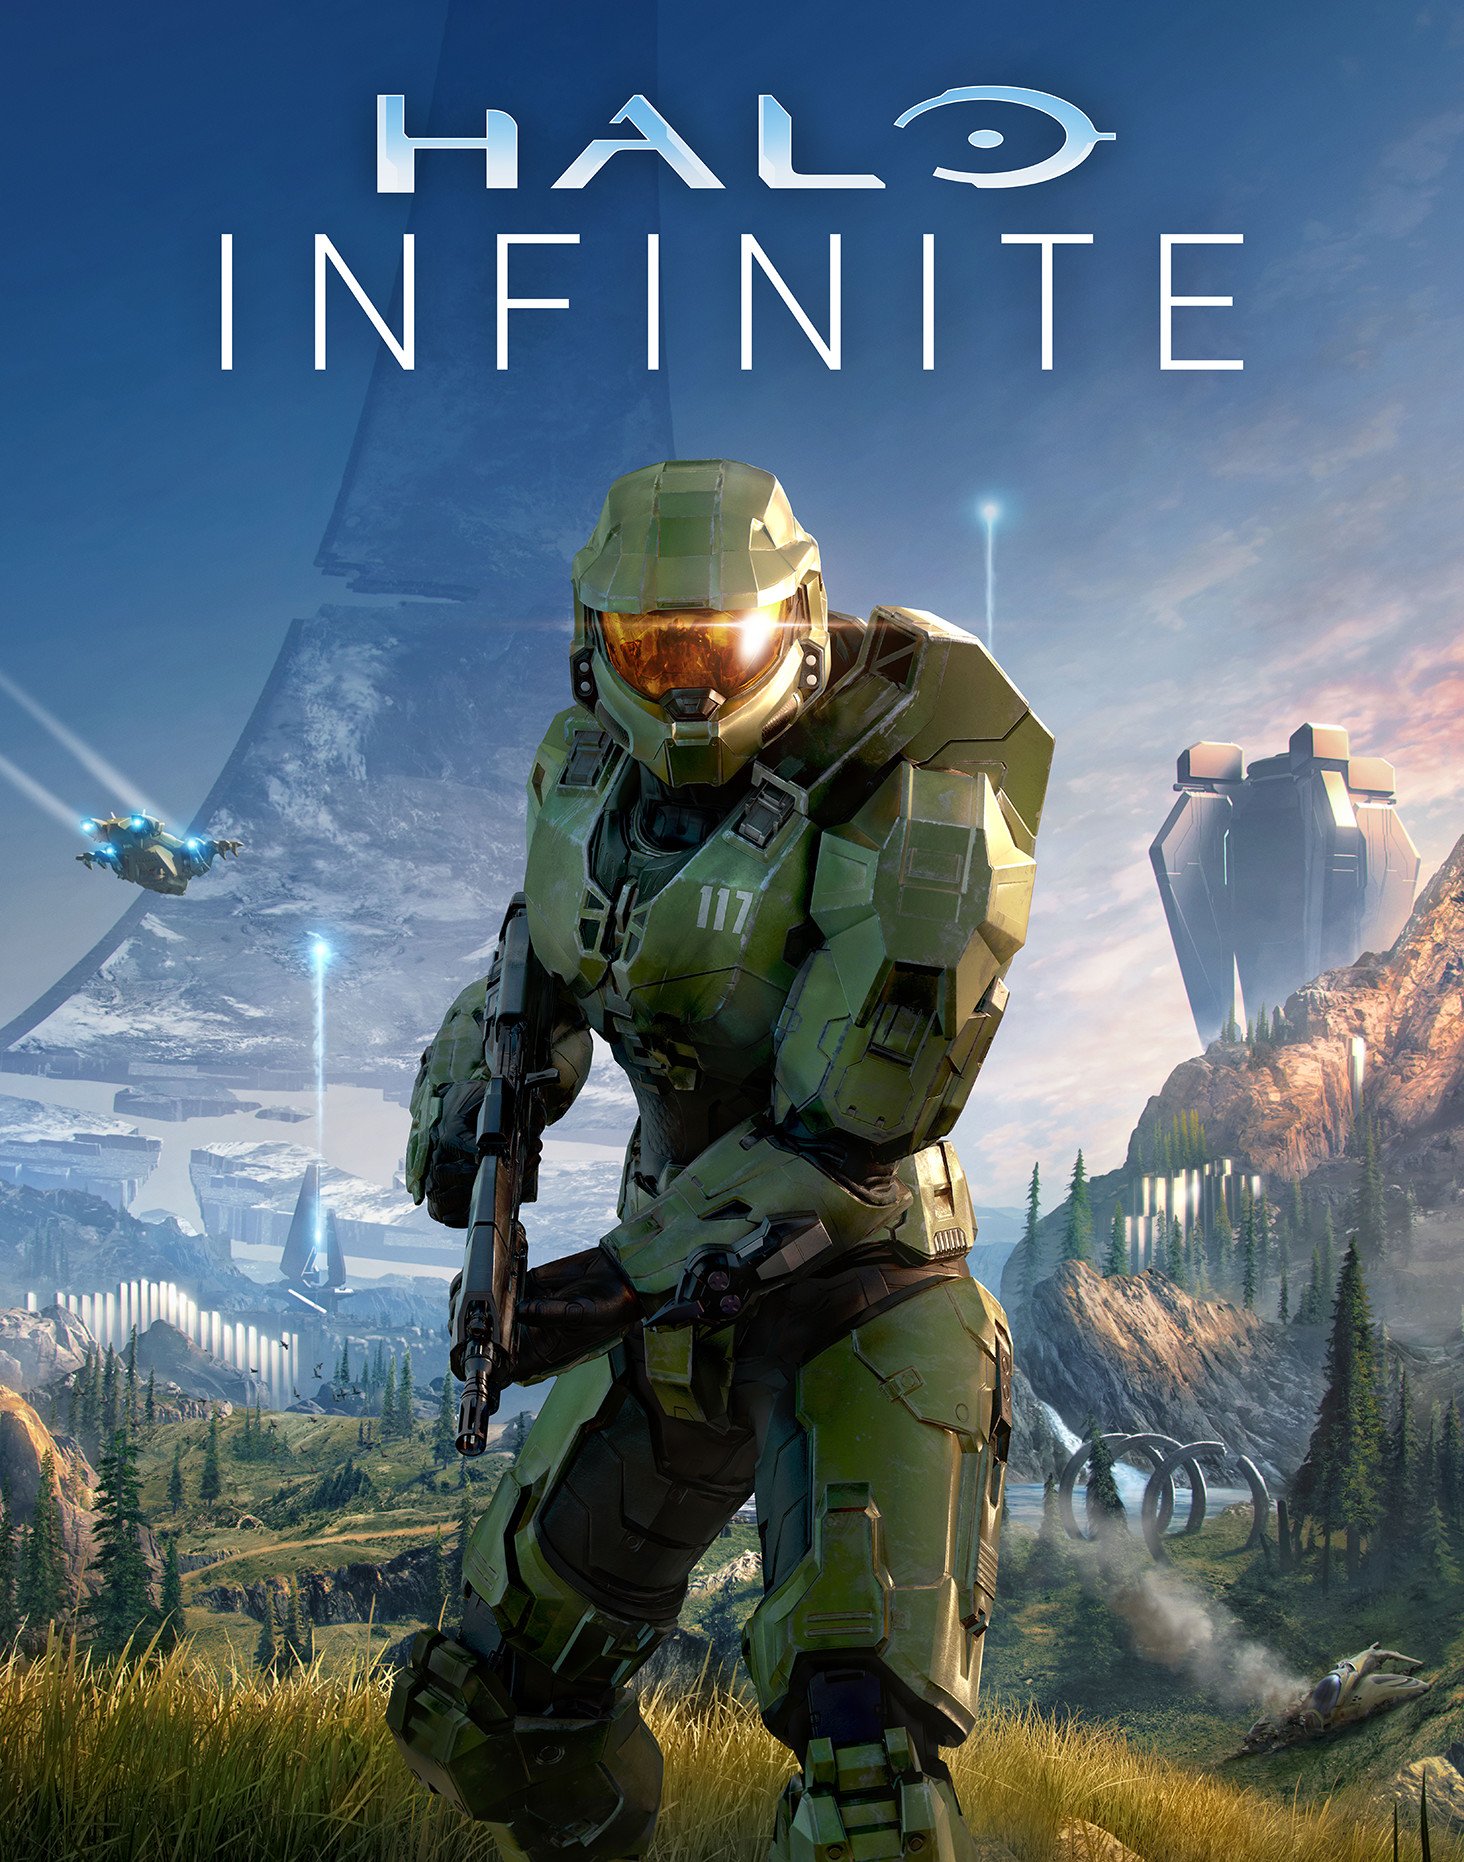 The Halo Infinite beta added two new game modes today